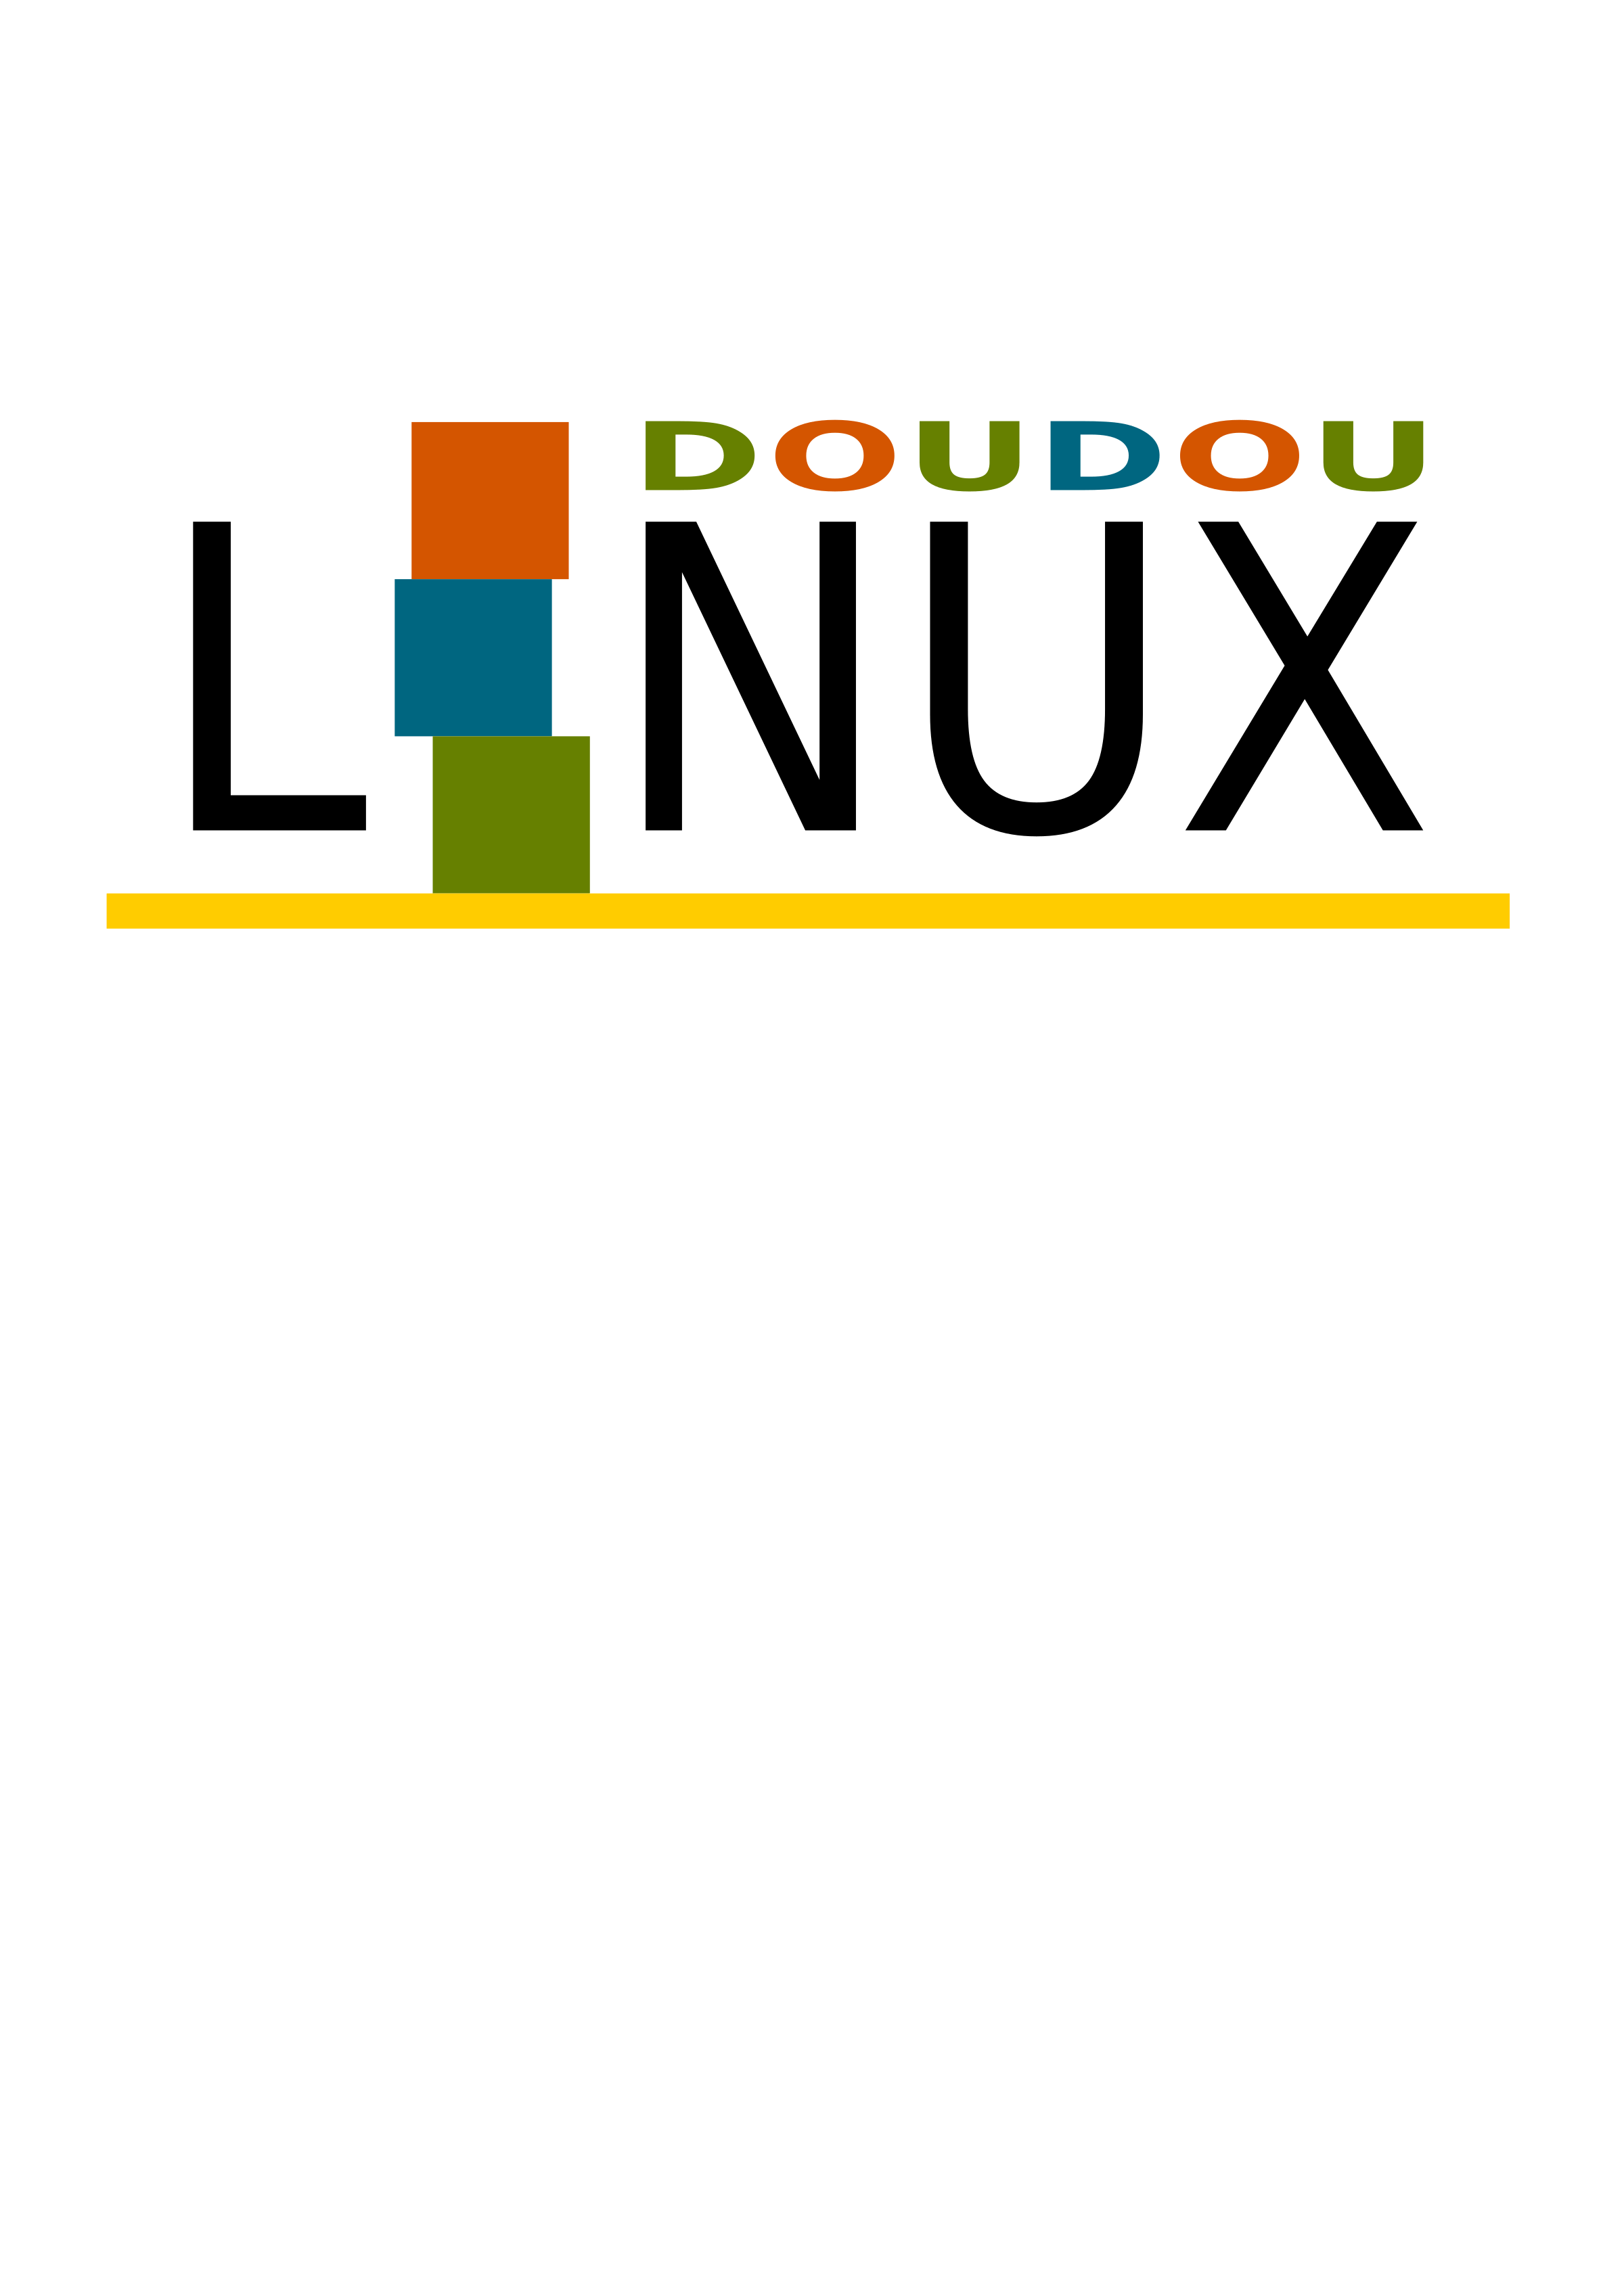 Original Linux Logo - doudou linux logo proposal Icon PNG PNG and Icon Downloads